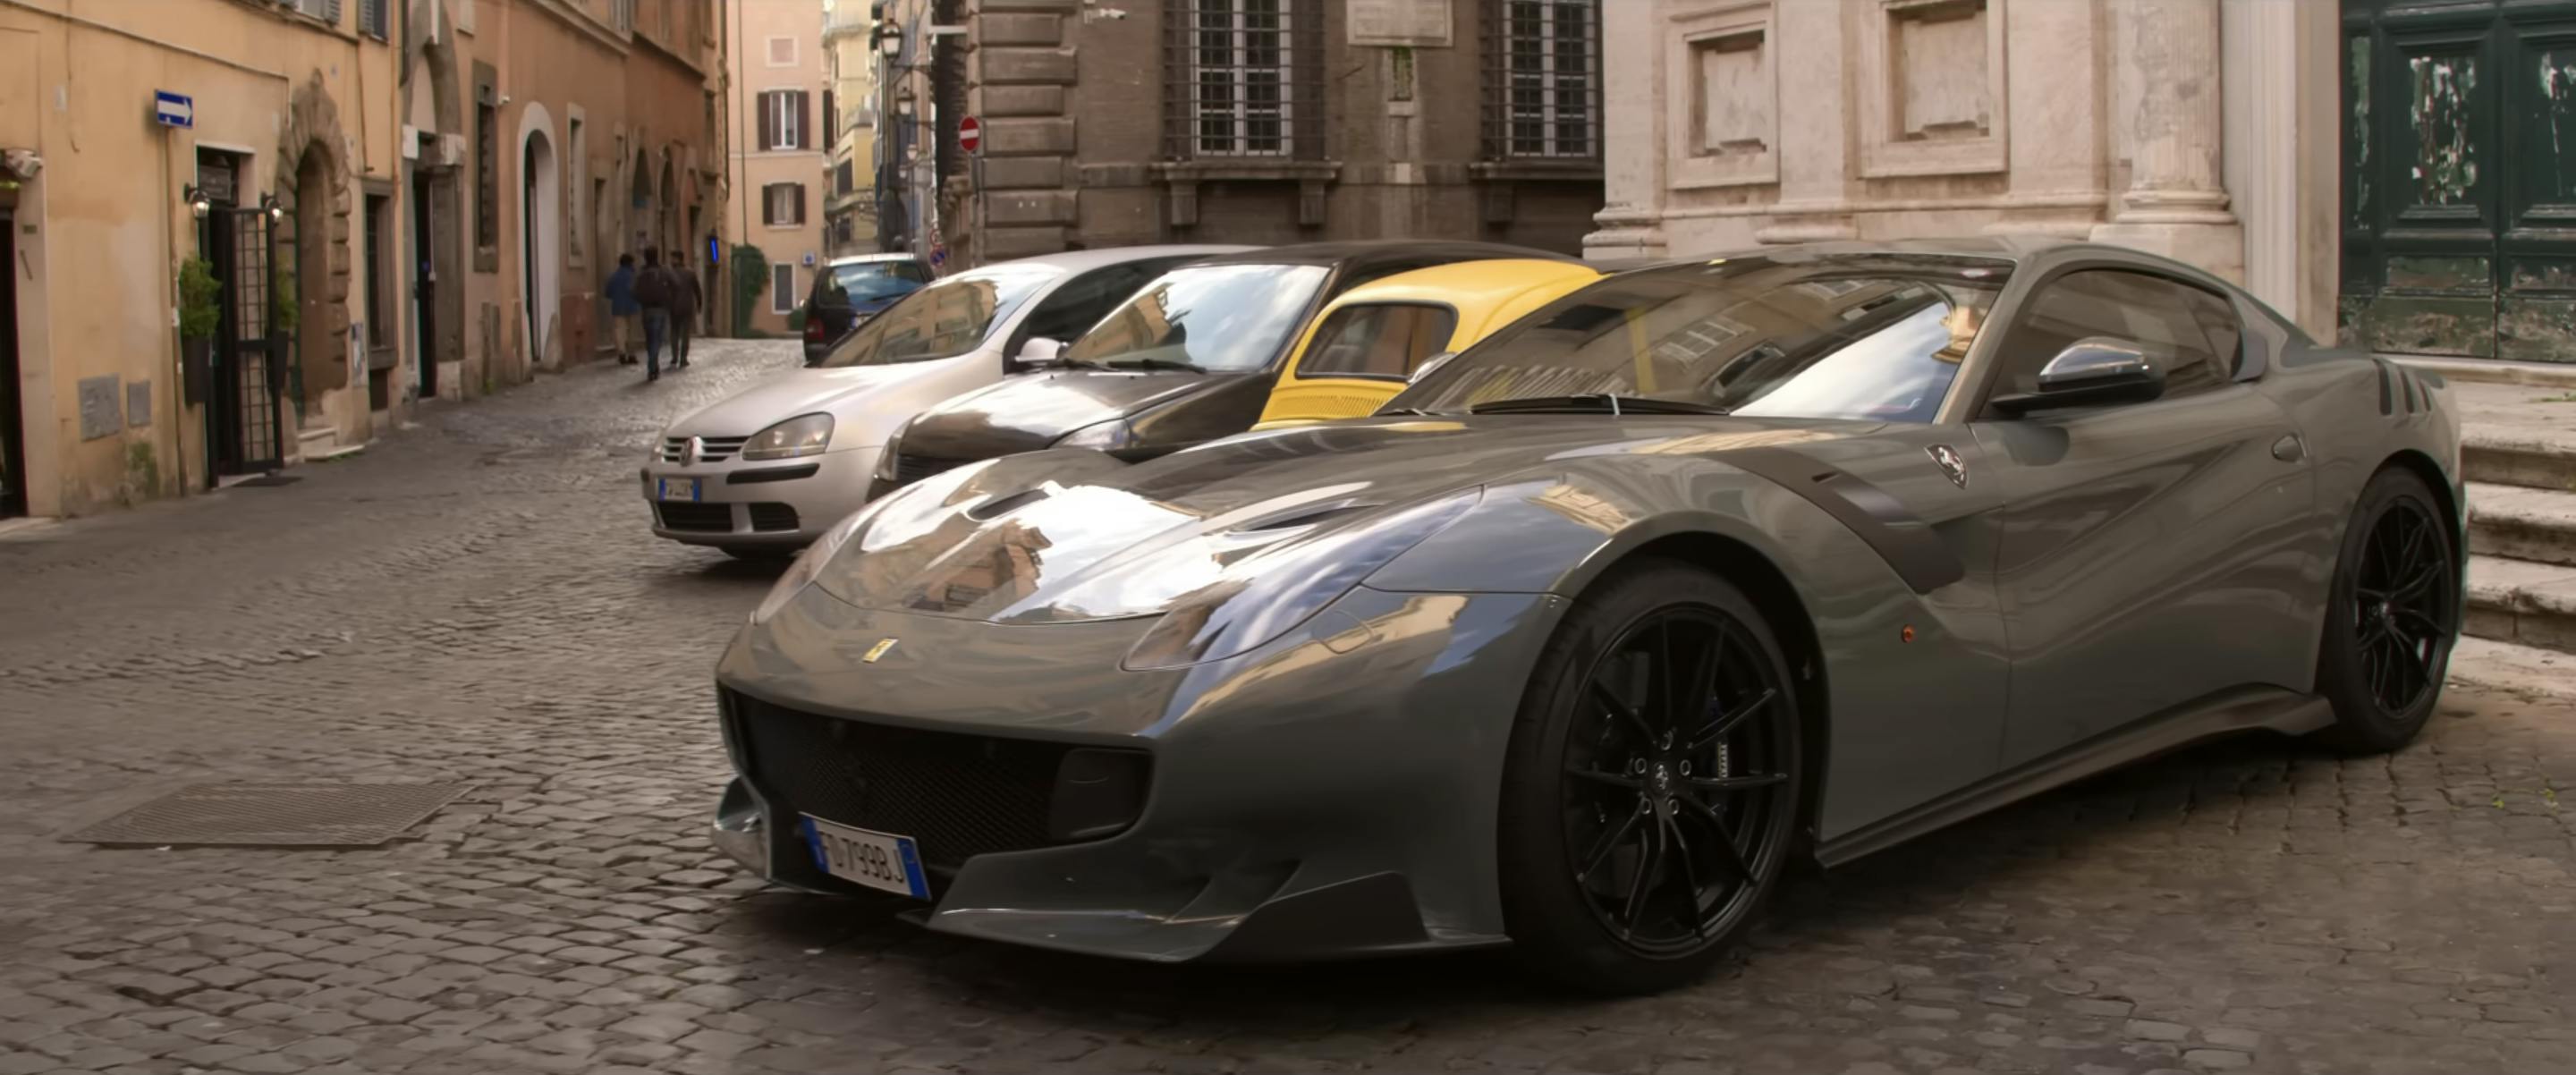 Mission Impossible ferrari F12tdf parked by yellow fiat 500 tom cruise